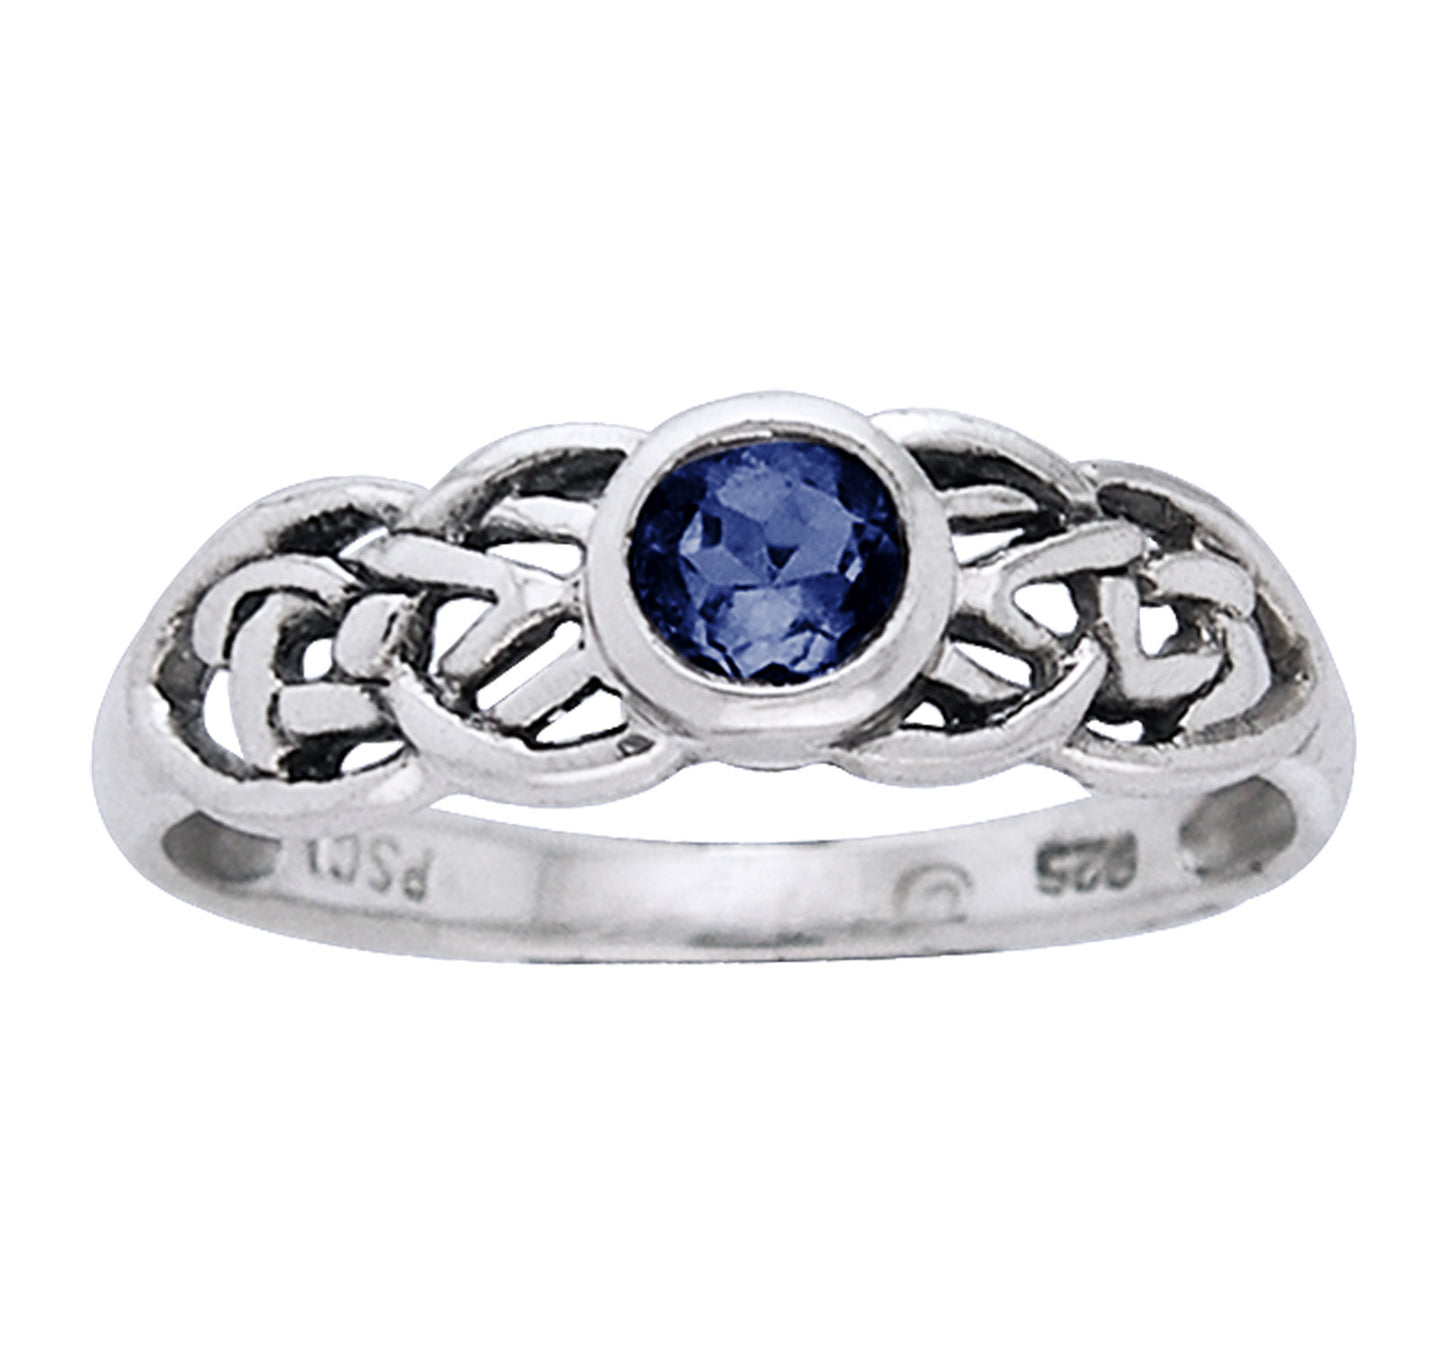 Petite Celtic Knot Birthstone Ring Sterling Silver Synthetic Sapphire For September - Silver Insanity